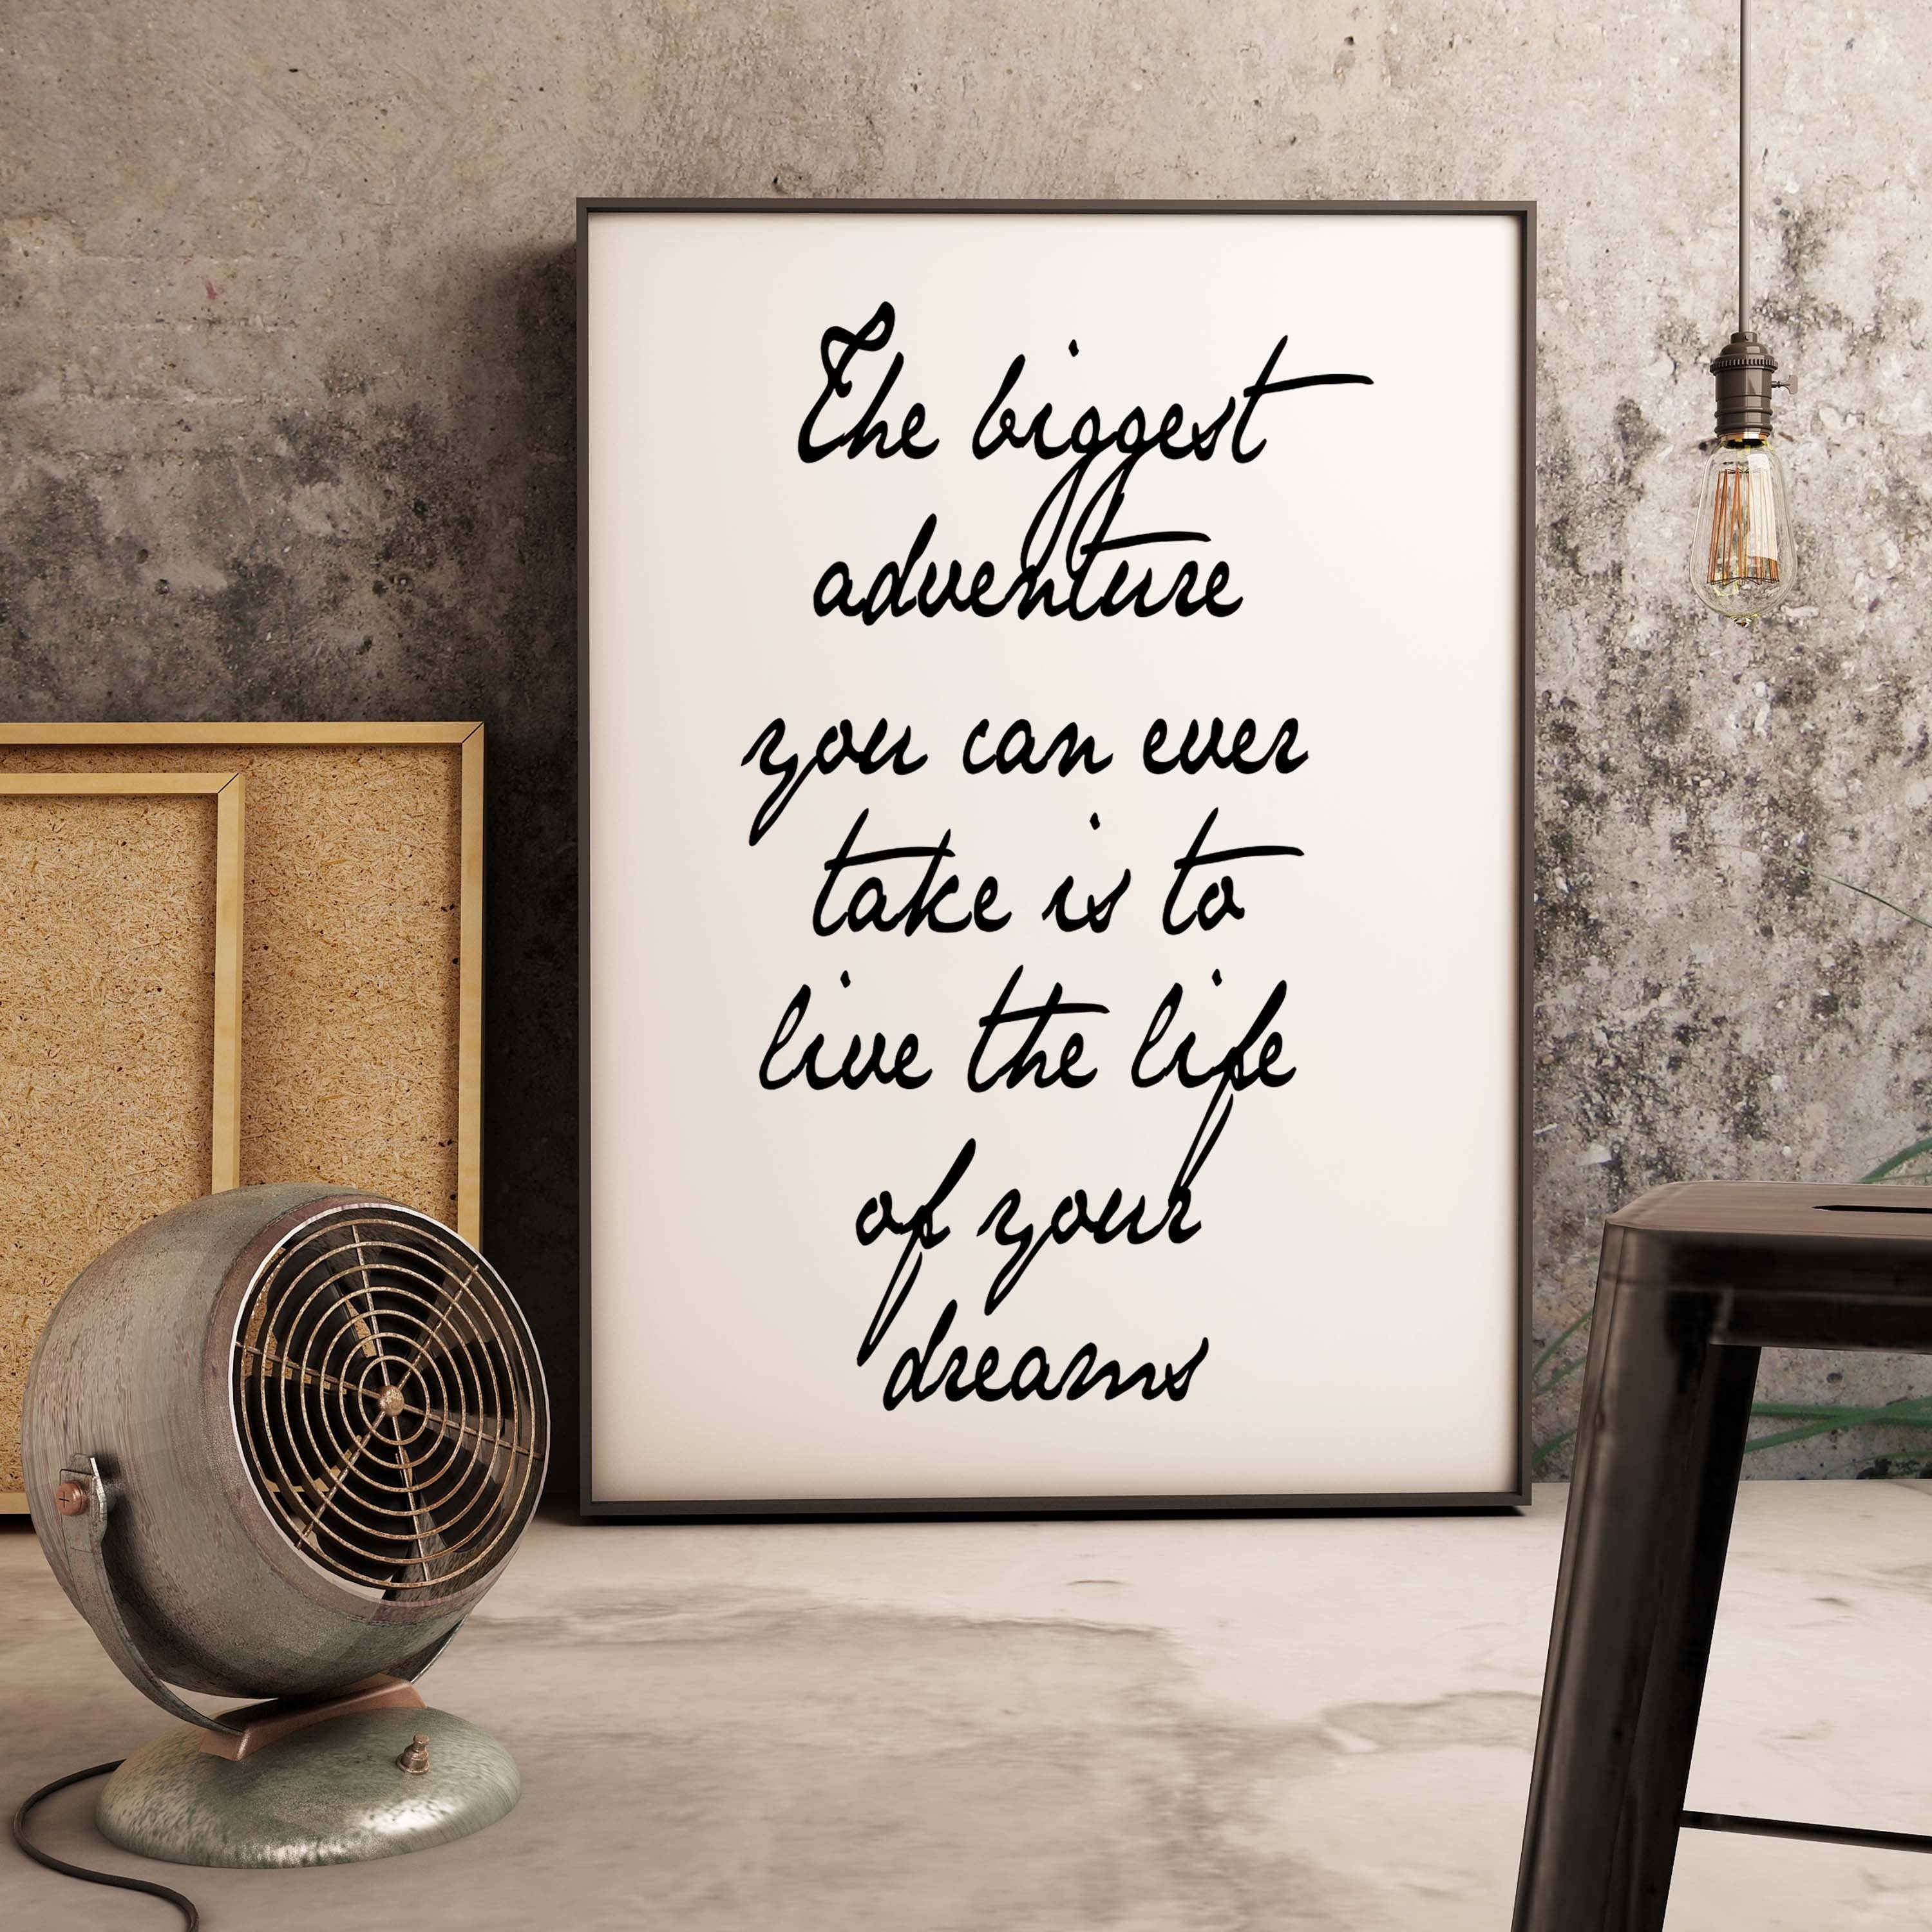 Live The Life of Your Dreams Quote Print, Motivational Minimalist Art in Black & White